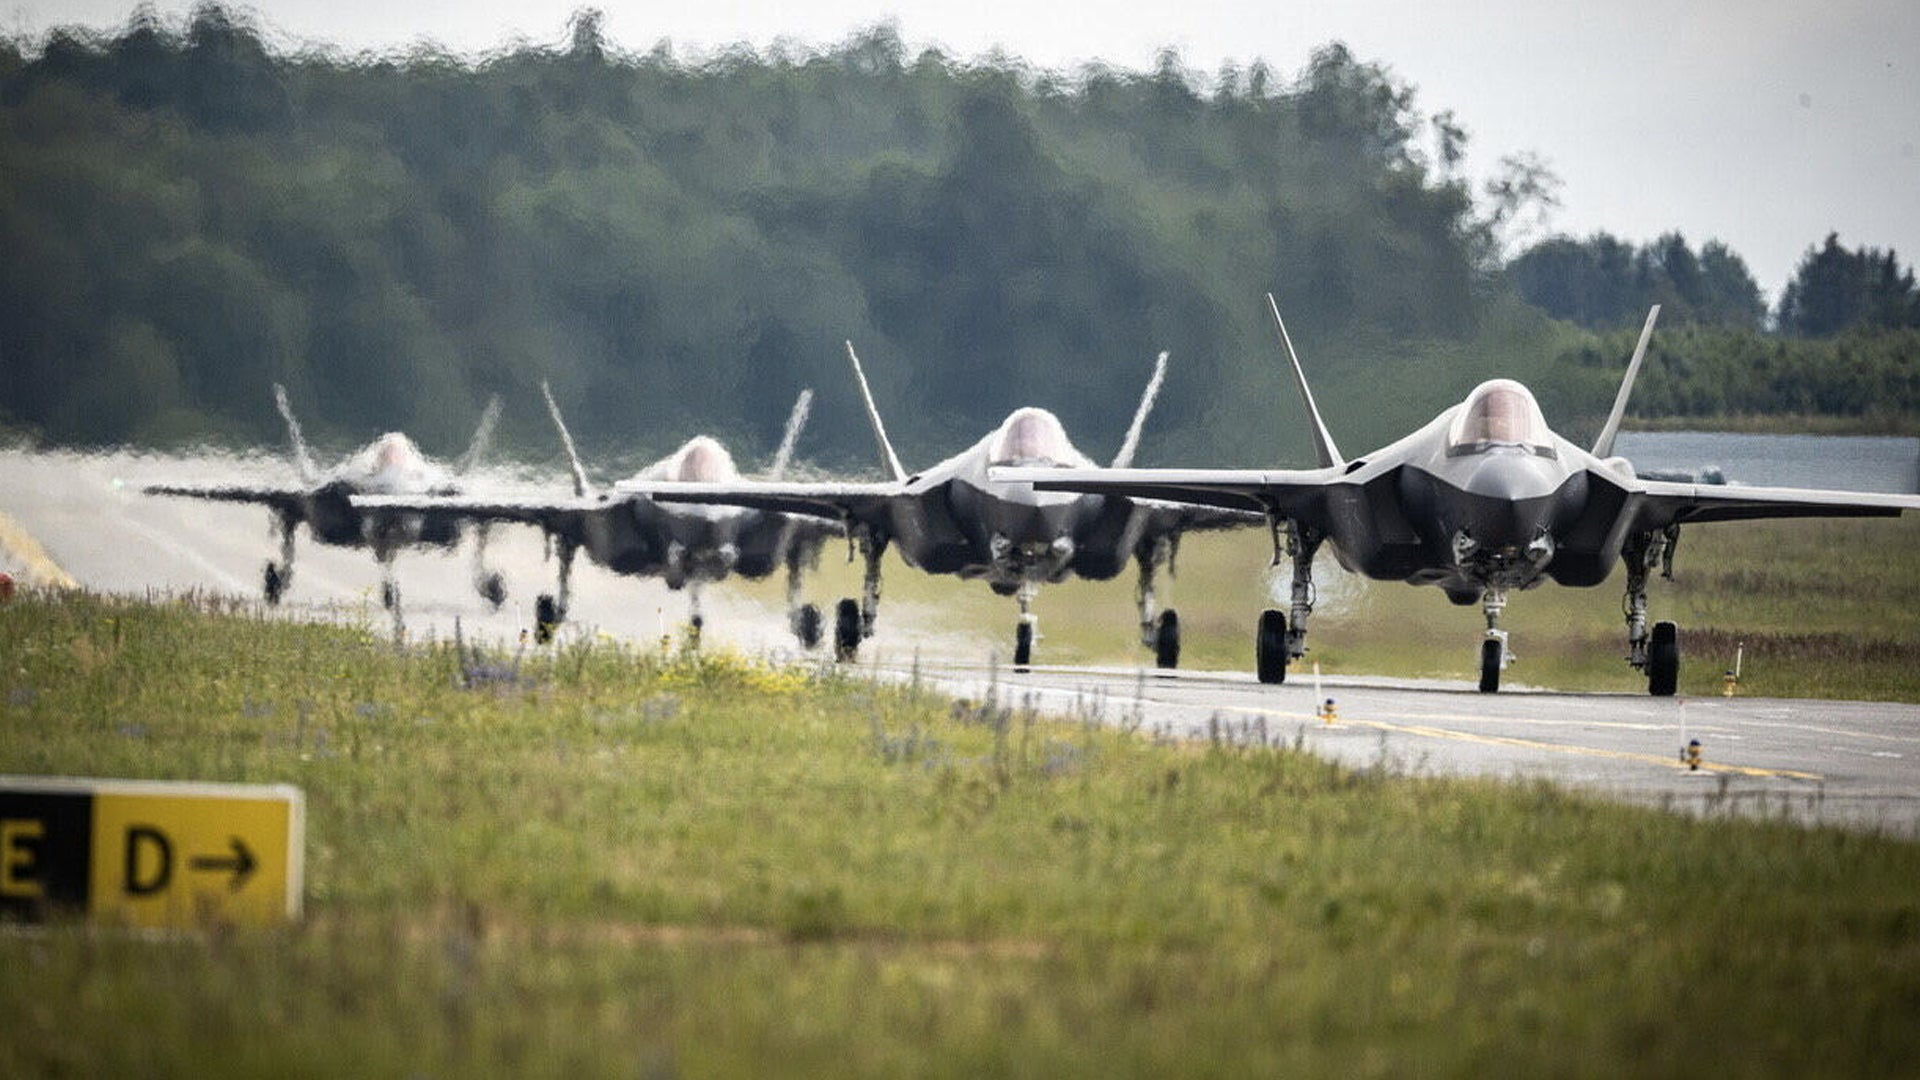 Four U.S. Air Force F-35A Lightning II aircraft assigned to the Vermont Air National Guard’s 158th Fighter Wing depart Spangdahlem Air Base, Germany, to support the NATO Air Shielding mission alongside French, British, Estonian, and Belgium allies at Amari Air Base, Estonia, July 6, 2022.(U.S. Air Force courtesy photo)